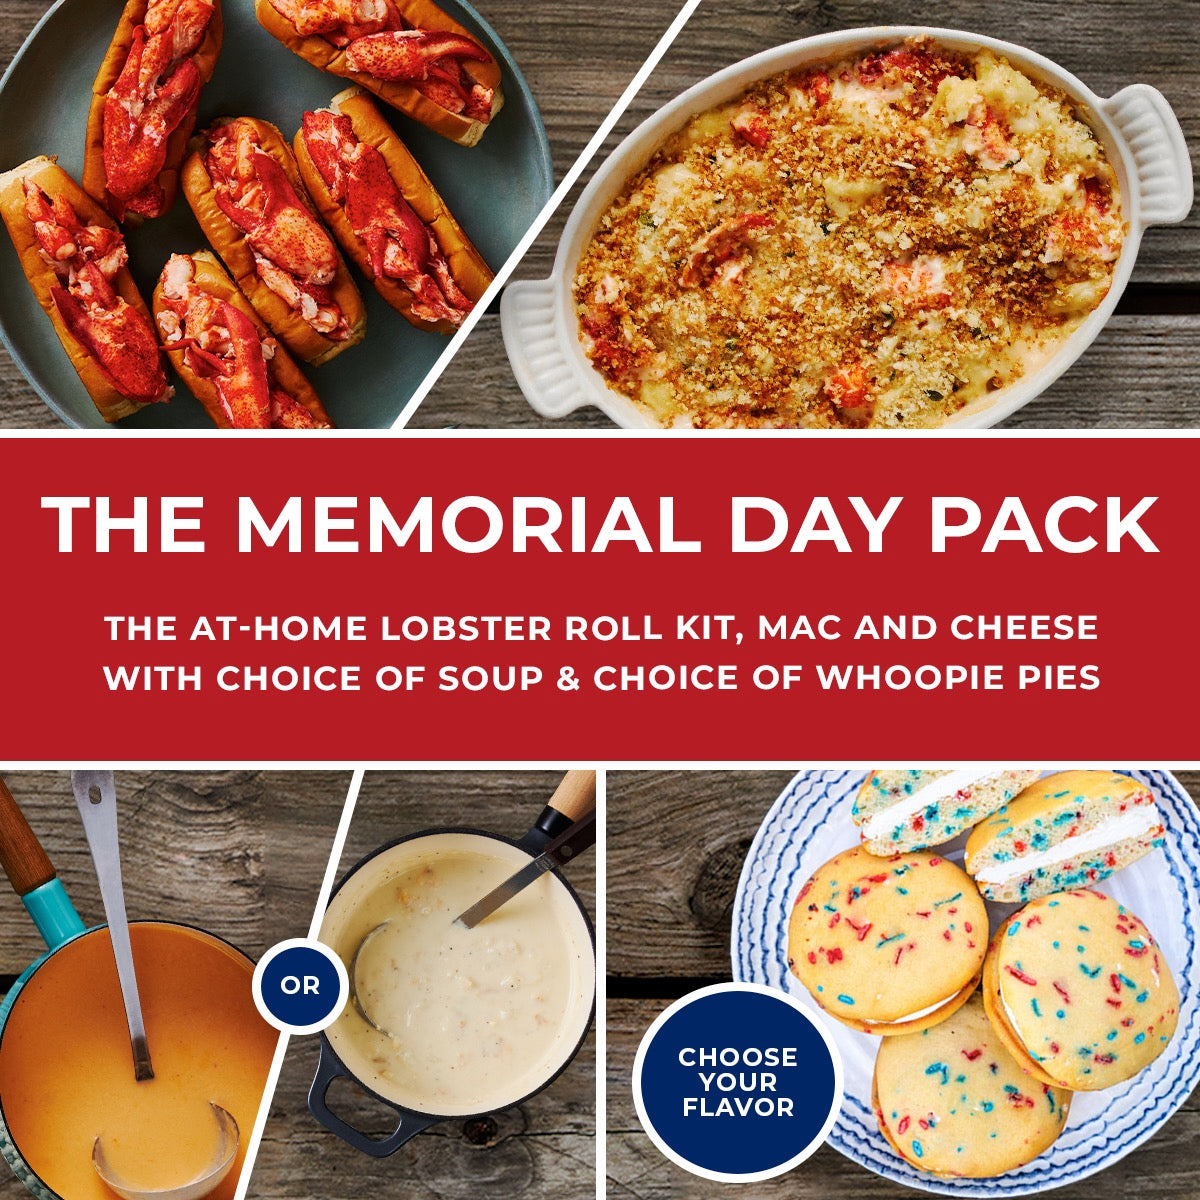 The Memorial Day Pack